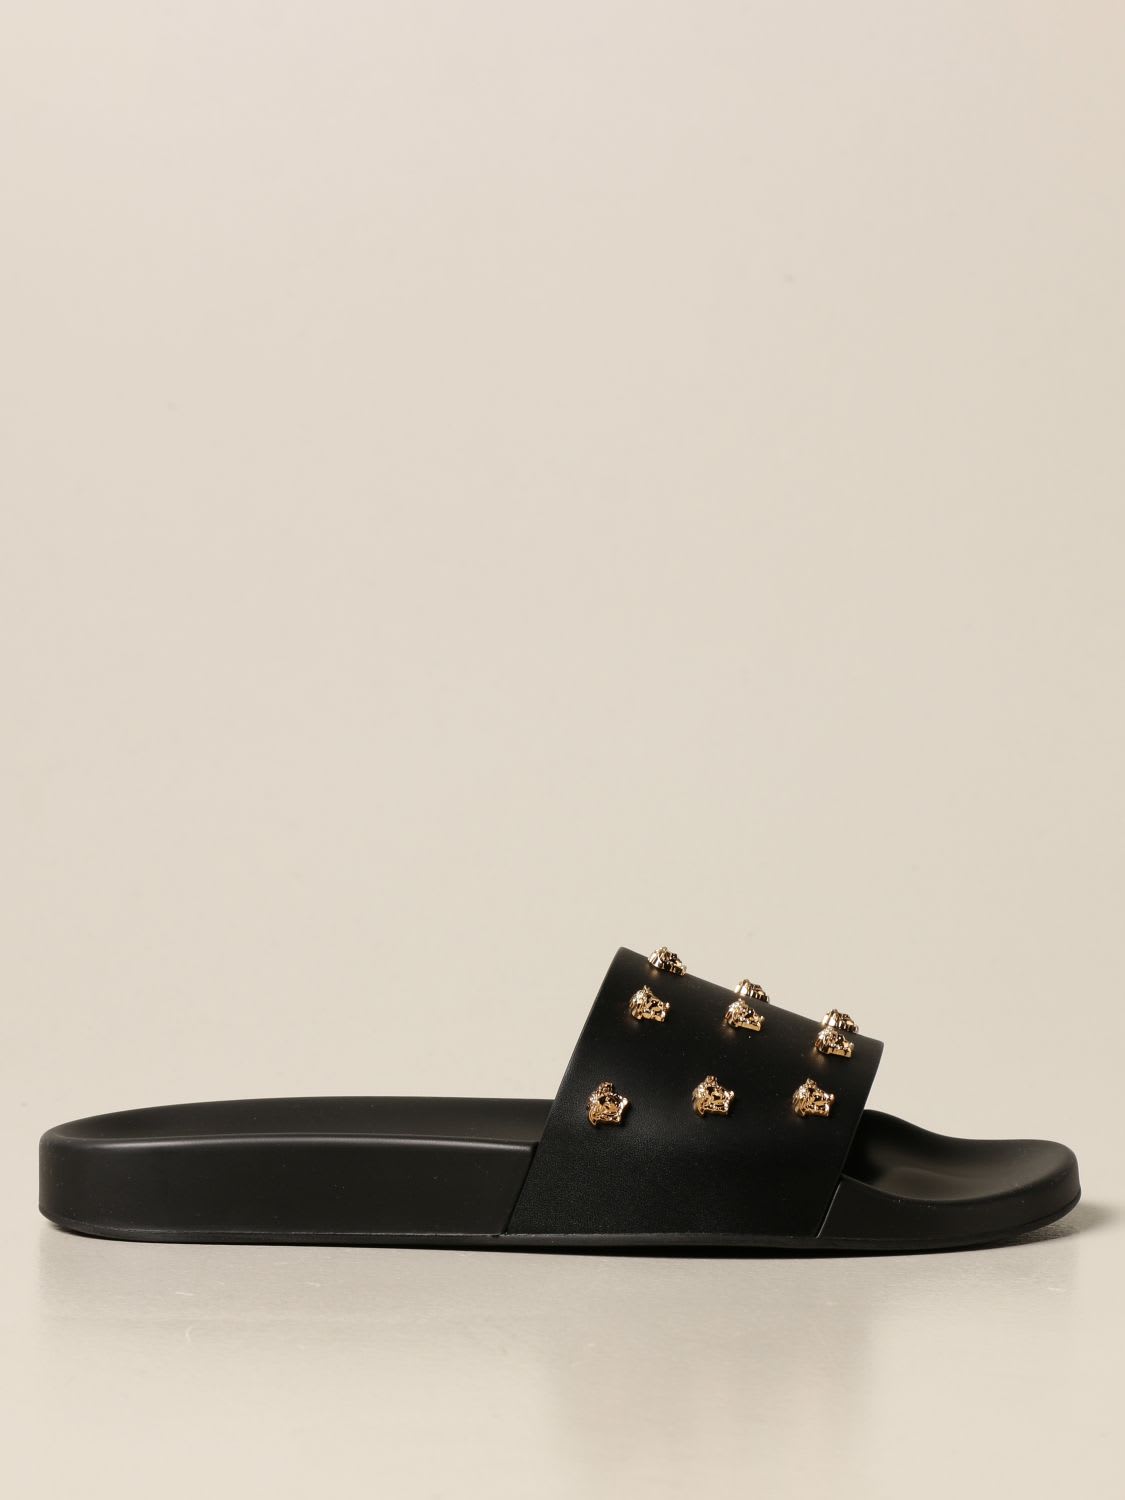 Buy Versace Flat Sandals Versace Leather Sandal With All-over Medusa Head online, shop Versace shoes with free shipping